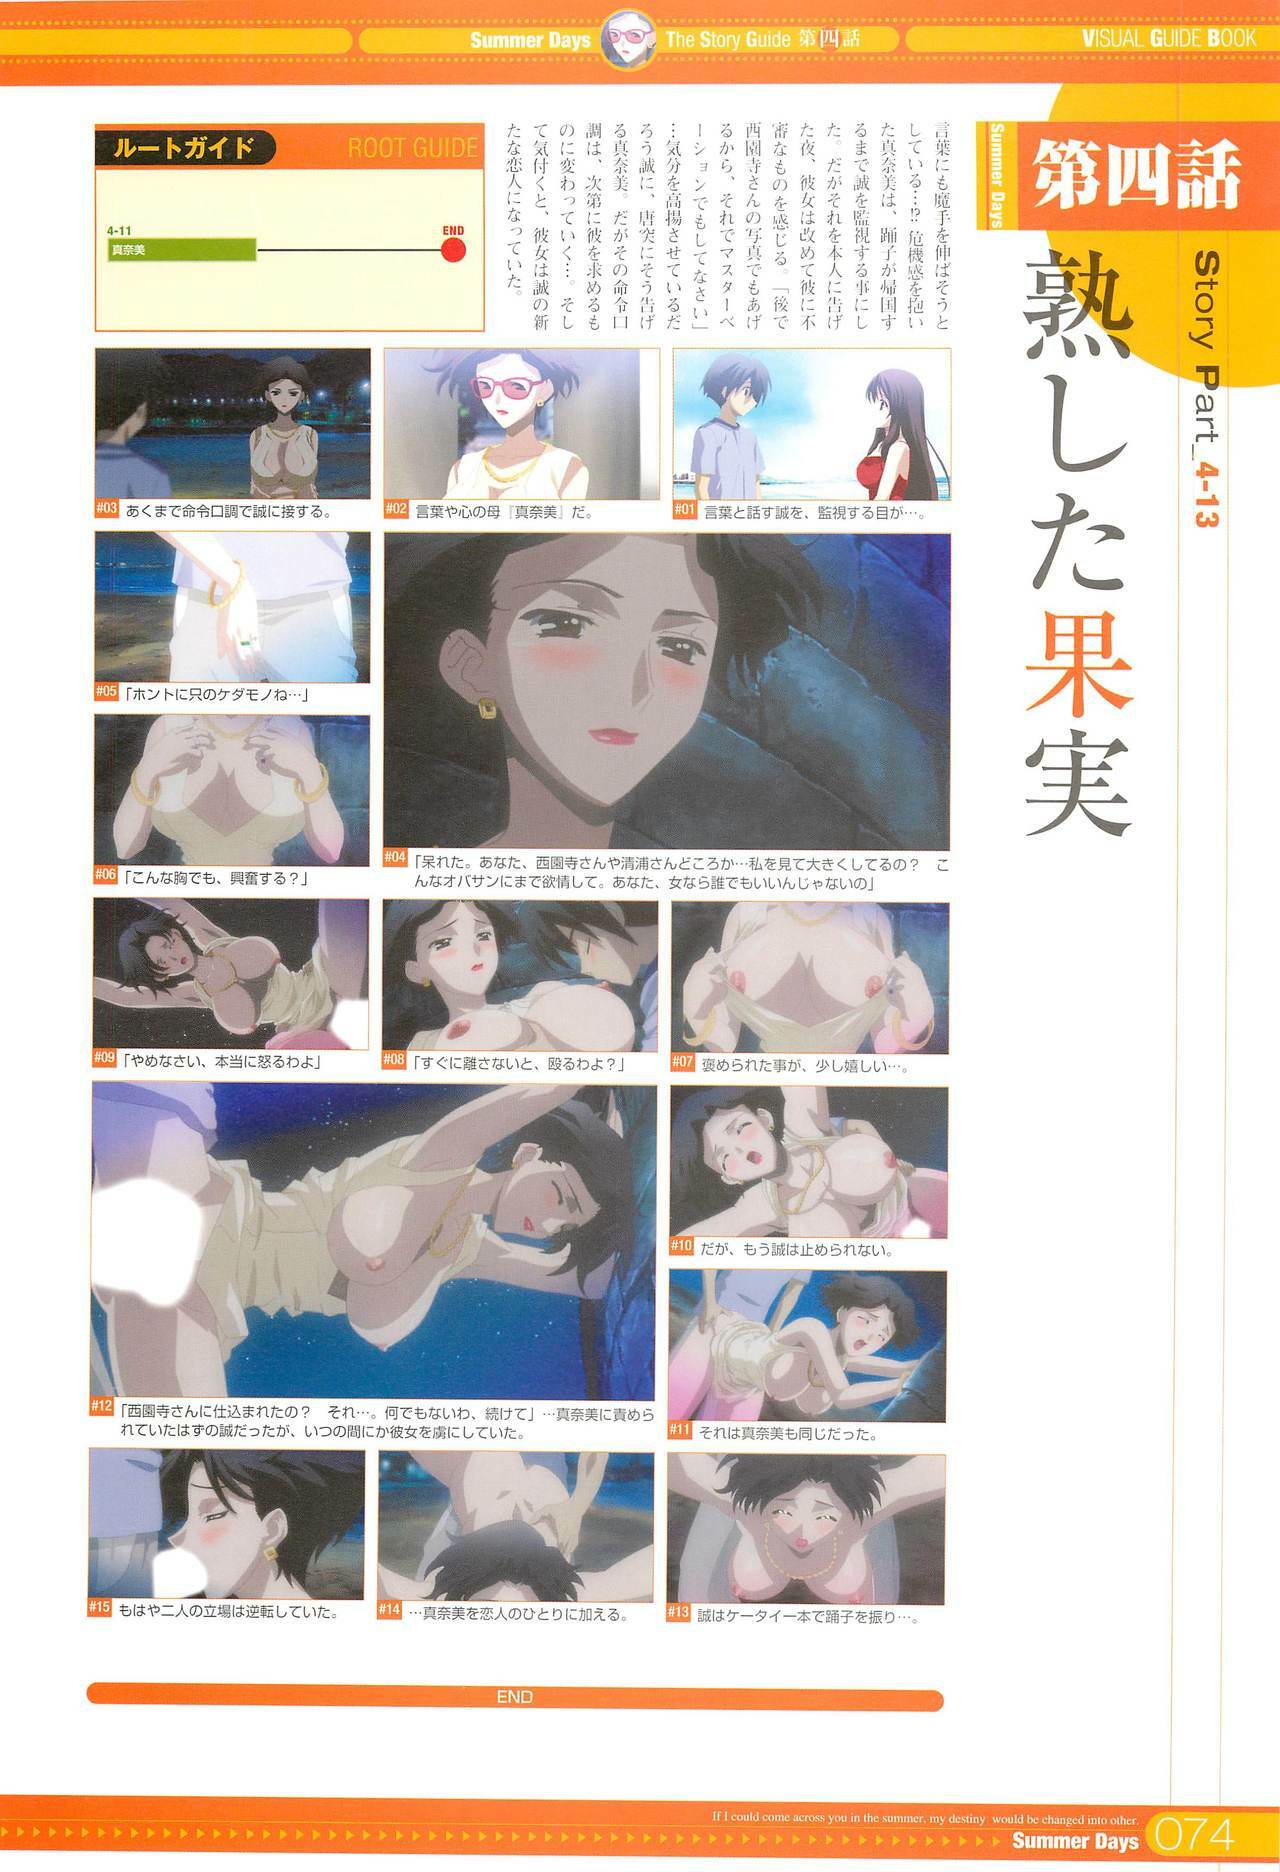 SummerDays Visual Guide Book page 42 full